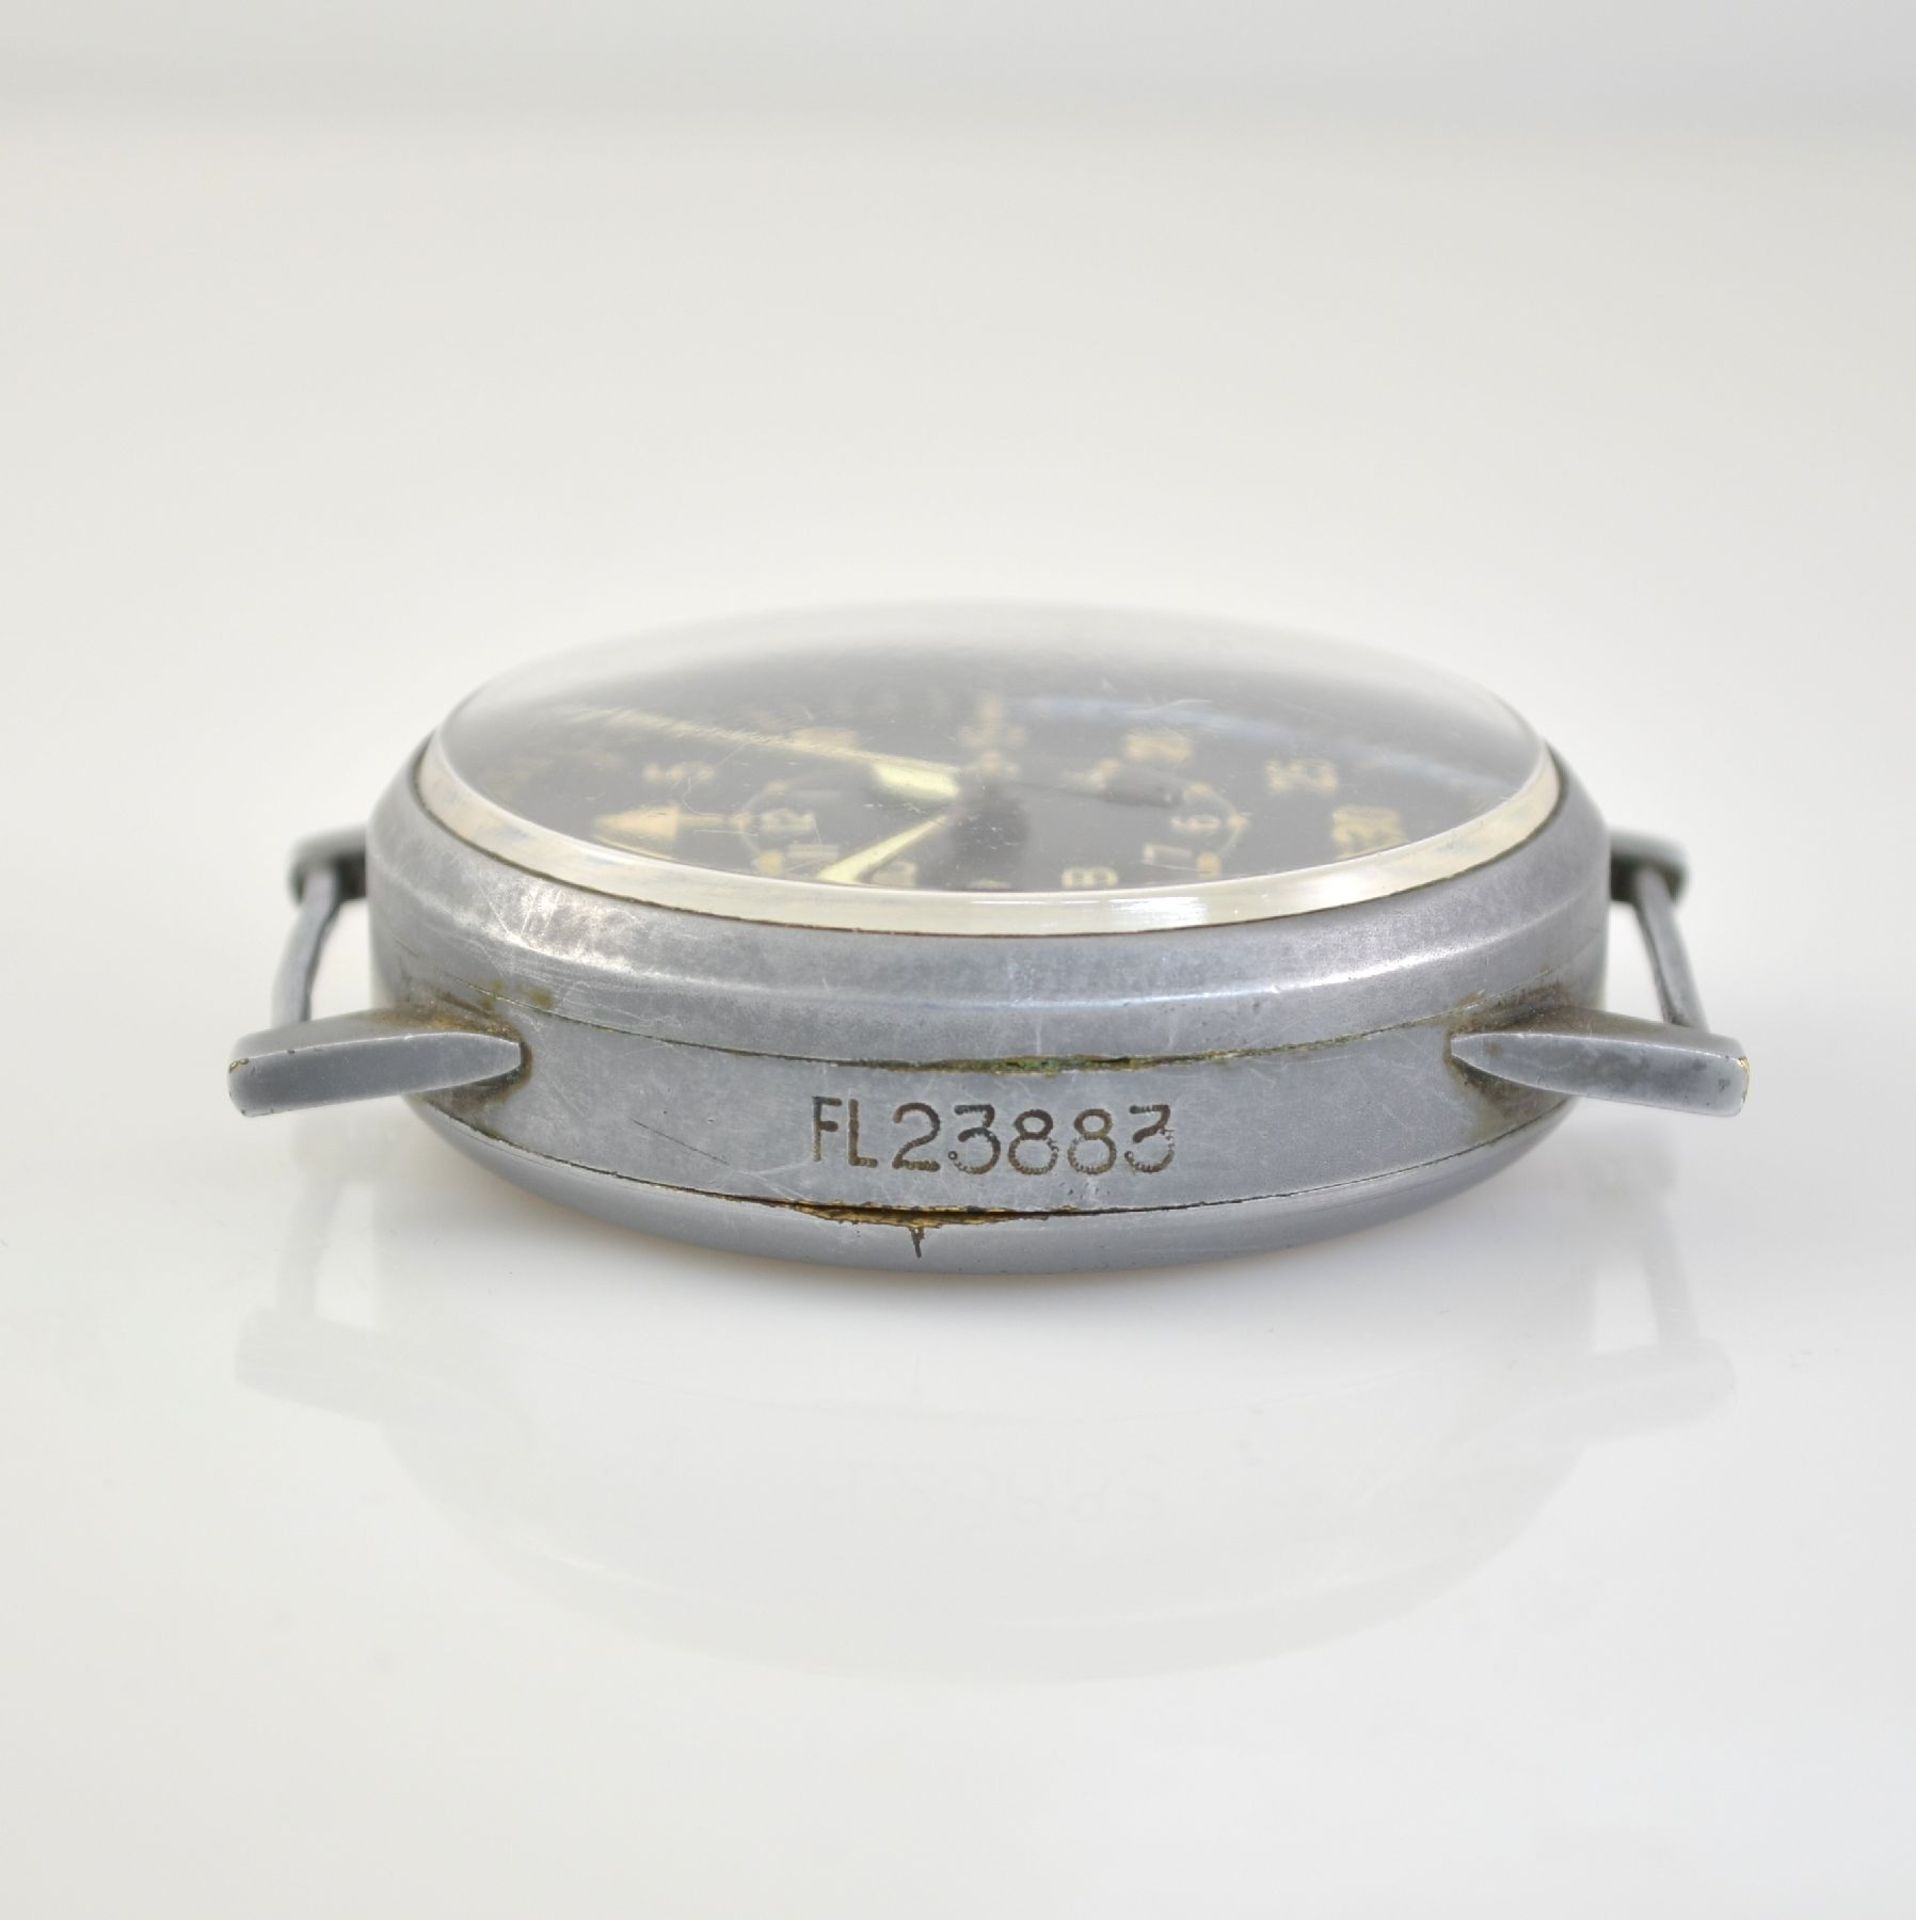 LACO aviation watch FL 23883, Germany around 1940, manual winding, grey lacquered metal case, snap - Bild 4 aus 4